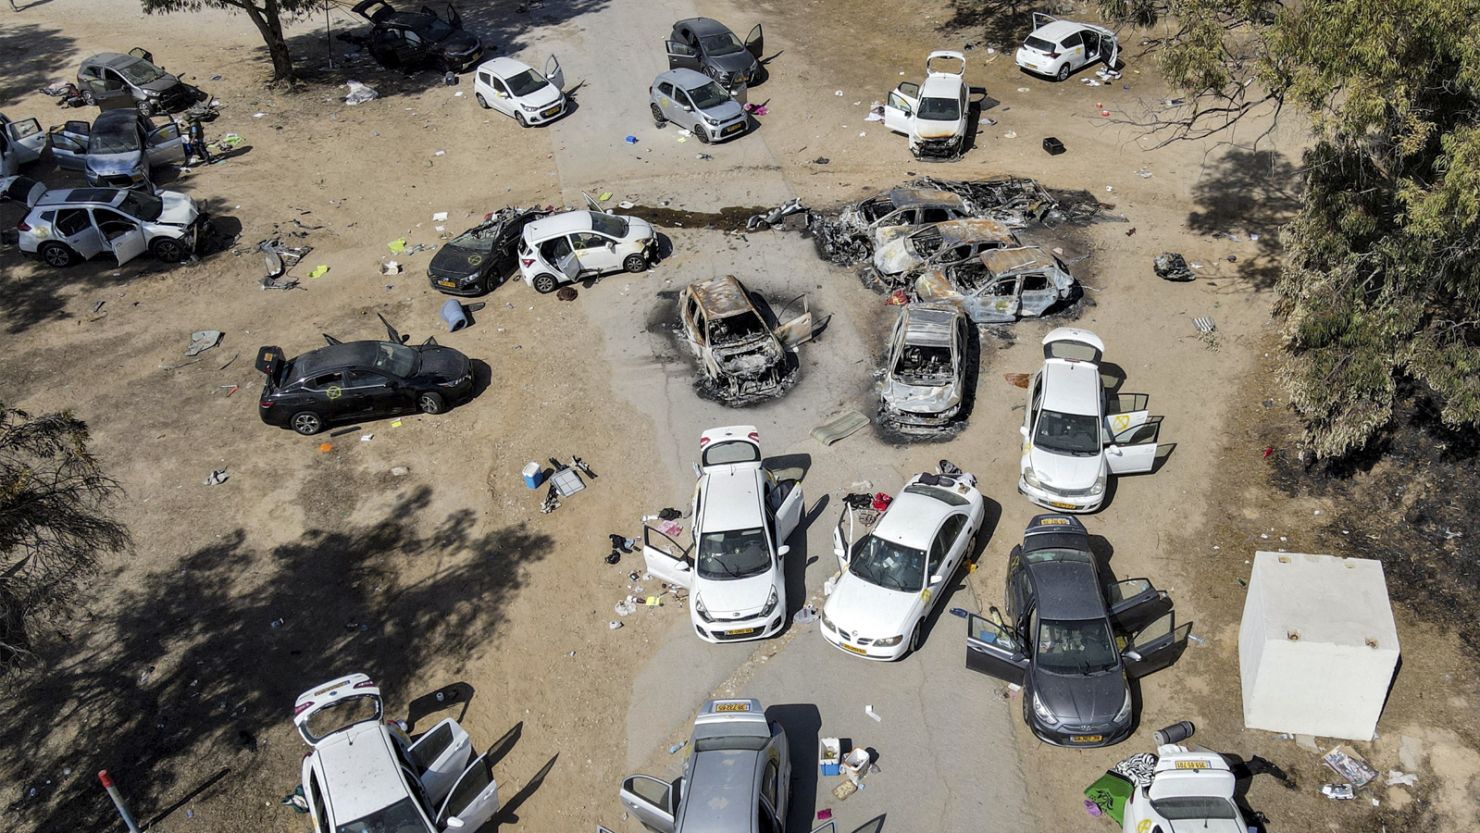 TOPSHOT - This aerial picture shows abandoned and torched vehicles at the site of the October 7 attack on the Supernova desert music Festival by Palestinian militants near Kibbutz Reim in the Negev desert in southern Israel on October 13, 2023. One month after Israel was wracked by Hamas attacks, life has been upended for both the Palestinians and Israel after it launched a war of reprisal in the Gaza Strip. The October 7 attacks by Hamas militants who stormed across from Gaza and struck kibbutzim and southern Israeli areas killed 1,400 people, mostly civilians, and deeply scarred the nation. The health ministry in Hamas-run Gaza says nearly 9,500 have been killed, two-thirds of them women and children, and mostly civilians. (Photo by Jack GUEZ / AFP) (Photo by JACK GUEZ/AFP via Getty Images)